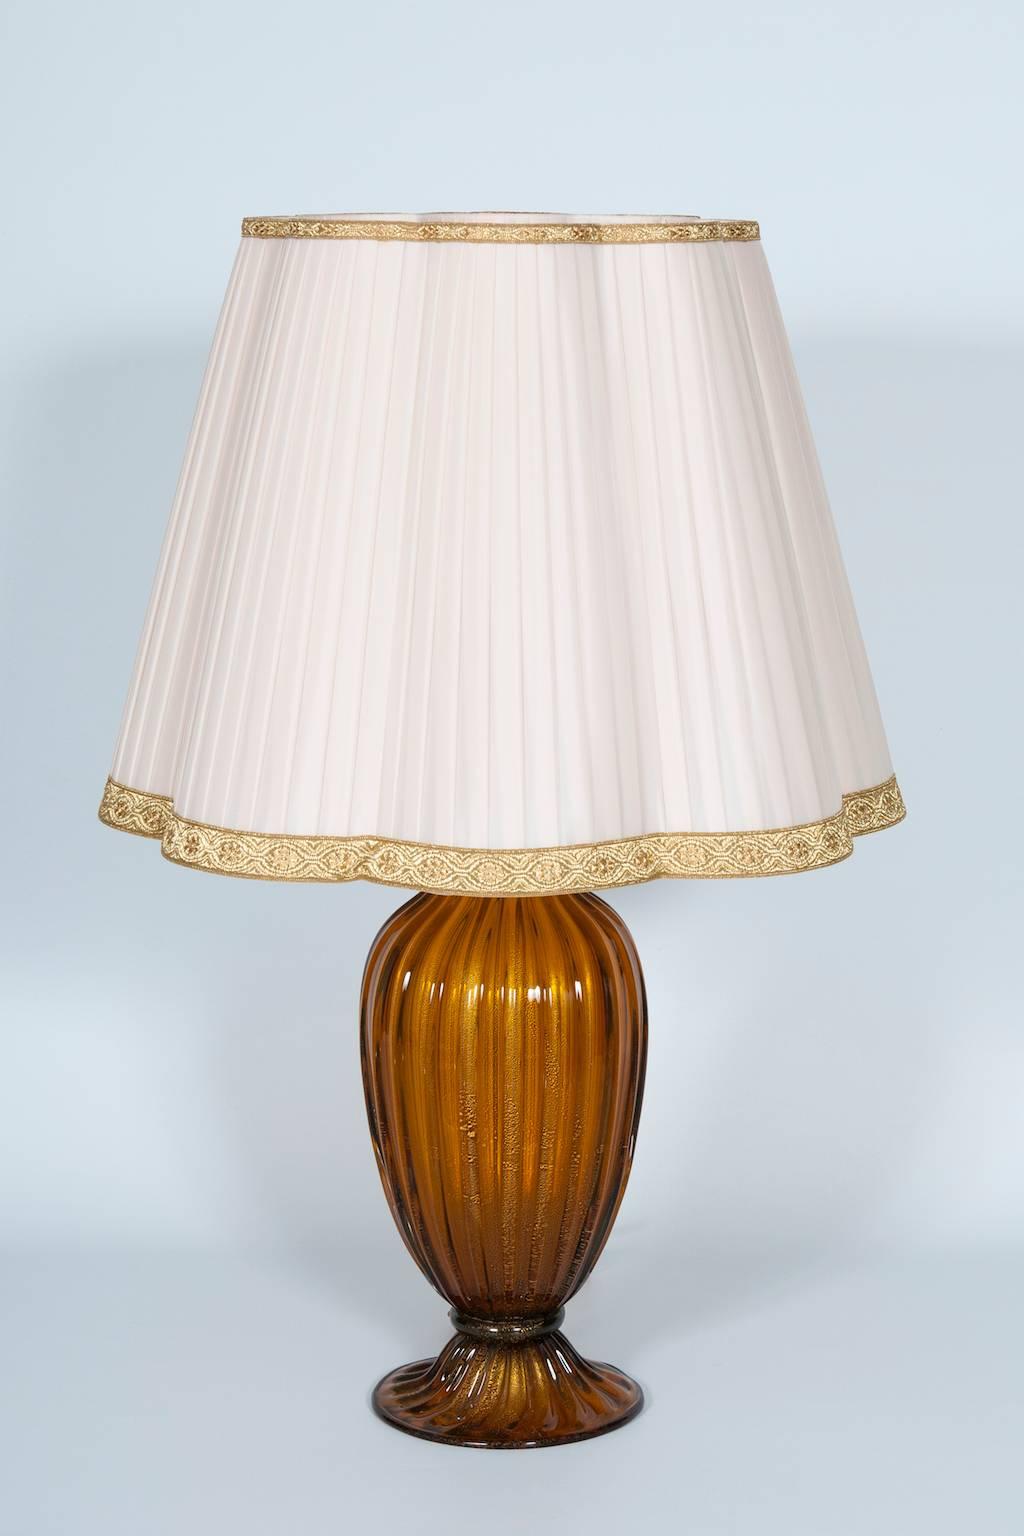 Elegant Italian Venetian Table Lamp in Blown Murano Glass, by Gabbiani, Amber Color with Gold Finishes, 1970s.
This is a uniquely refined work of art, entirely handcrafted in blown Murano glass in the Venetian island of Murano. The central body and